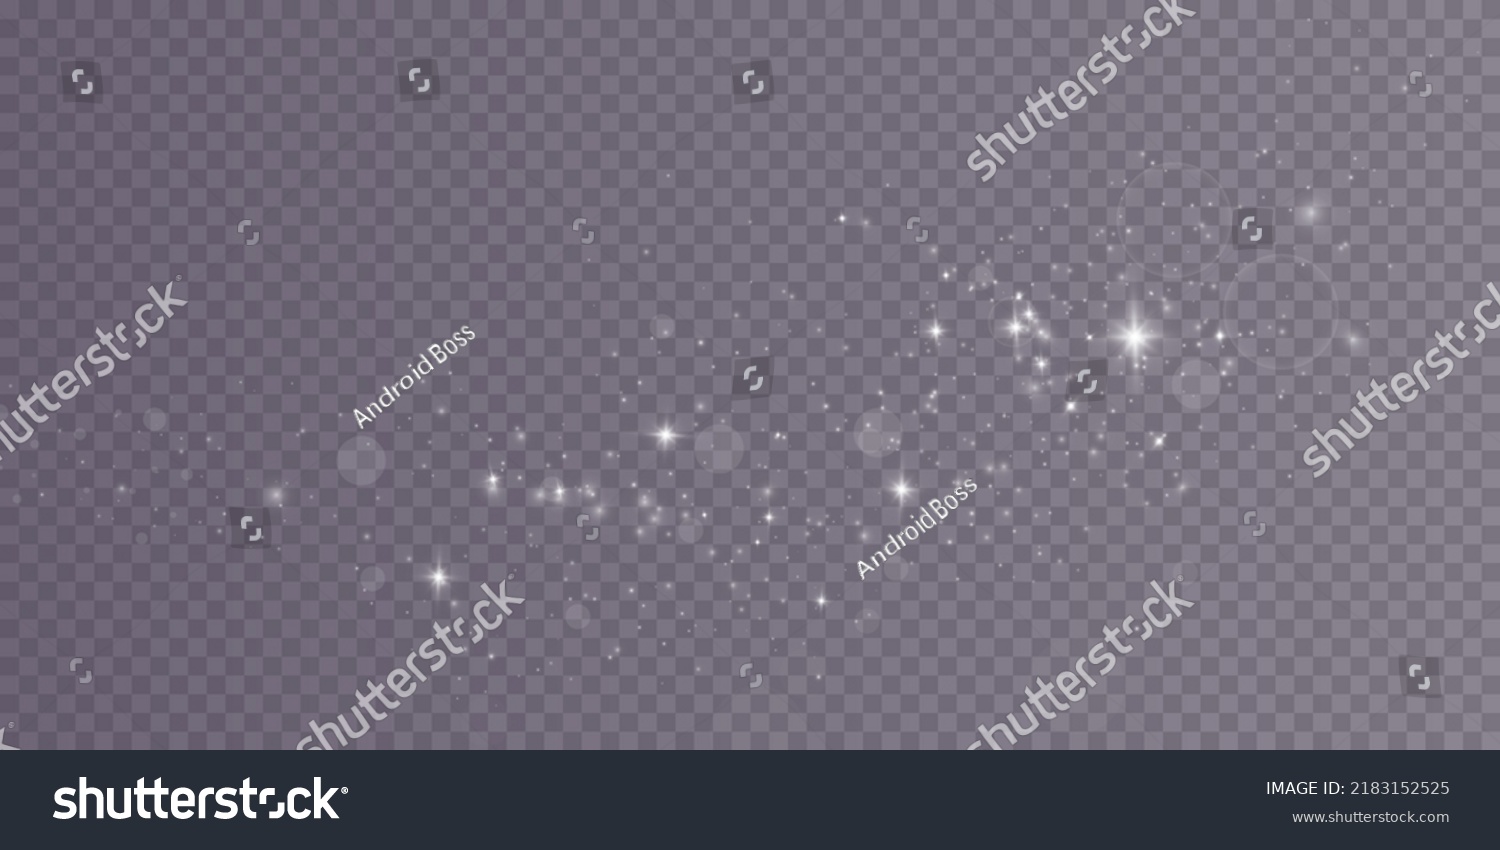 White png dust light. Bokeh light lights effect background. Christmas background of shining dust Christmas glowing light bokeh confetti and spark overlay texture for your design.
 #2183152525